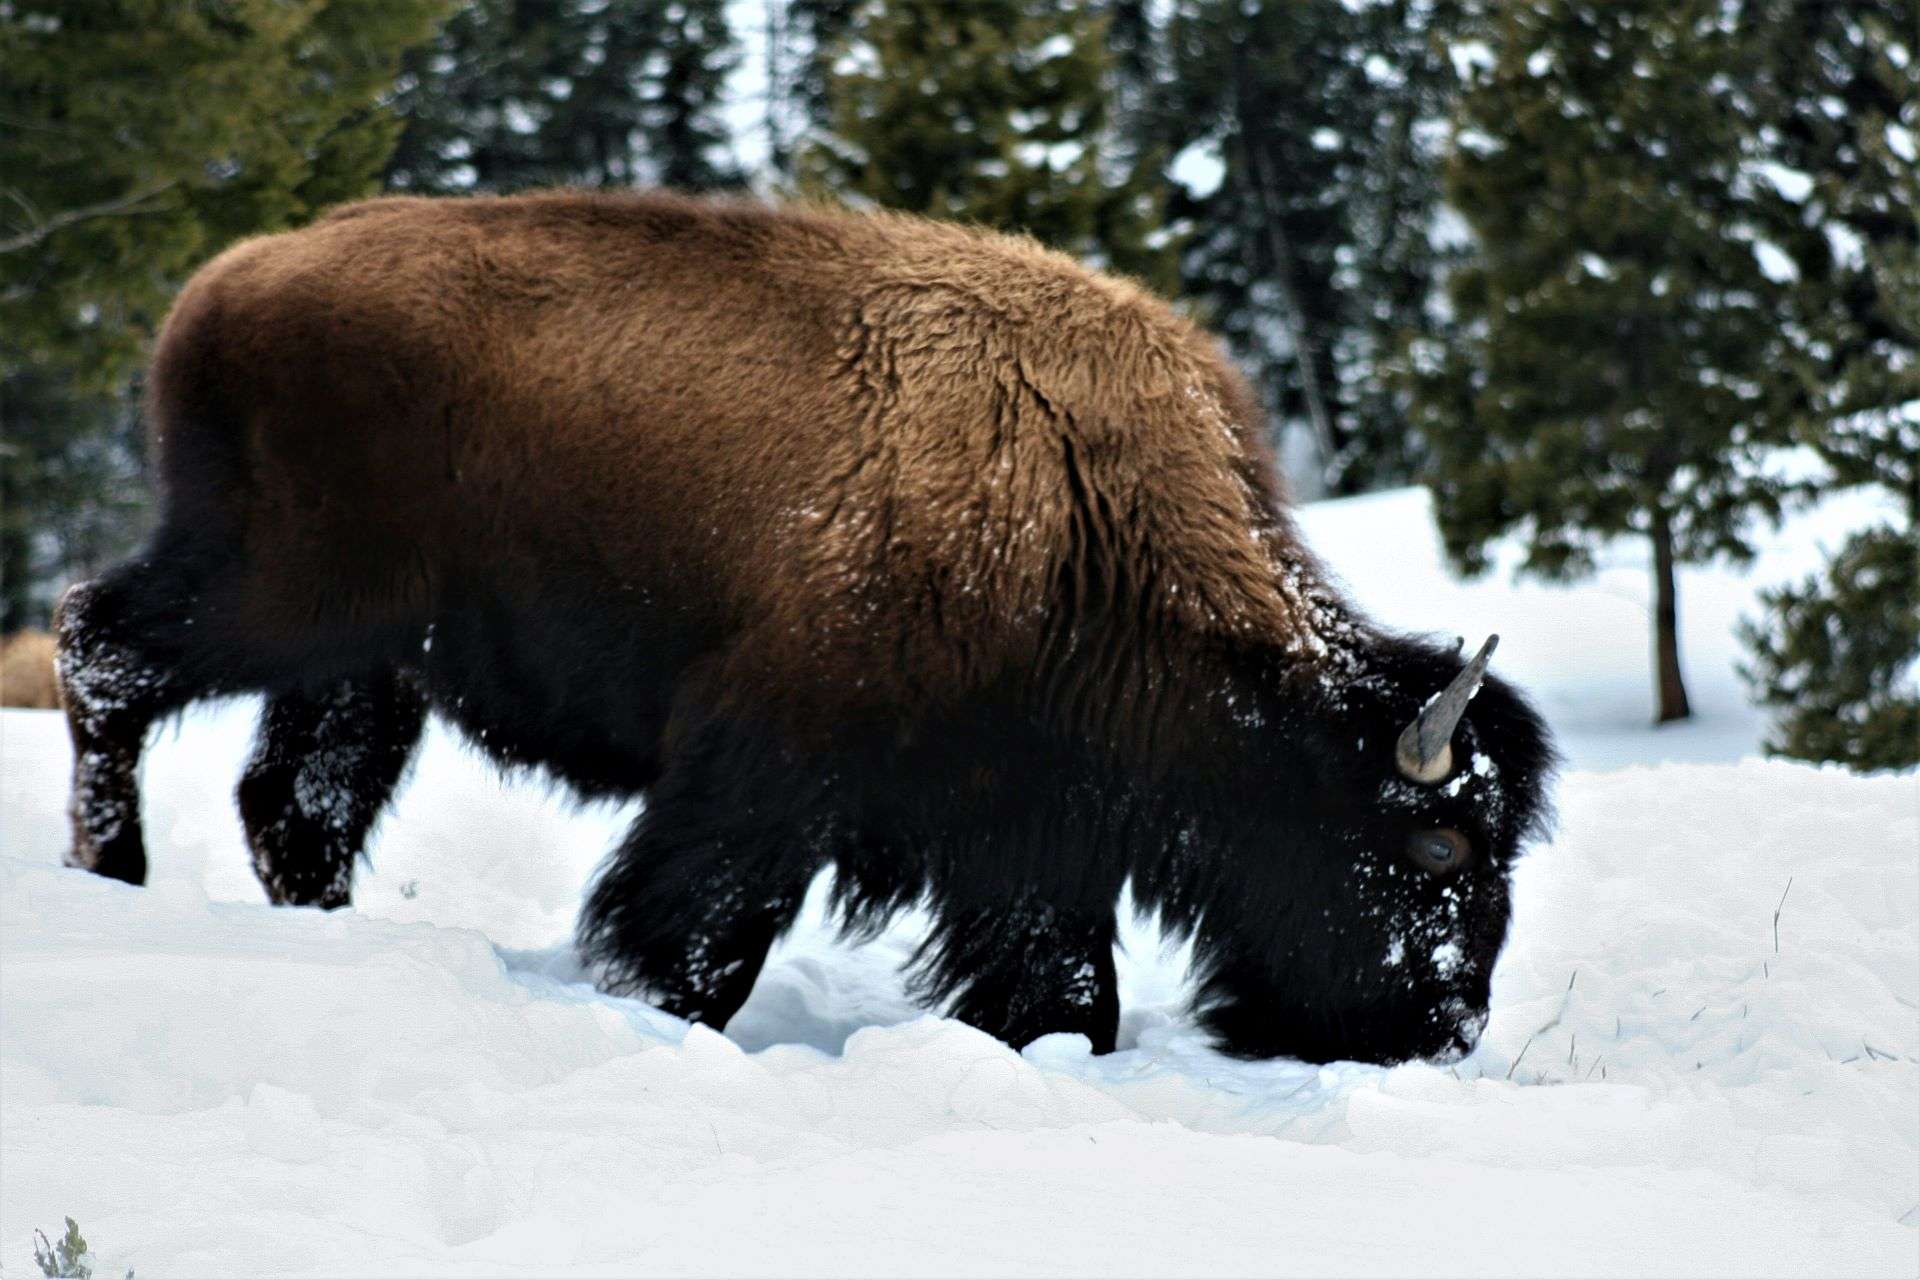 Bison grazing in the wintertime at Yellowstone National Park